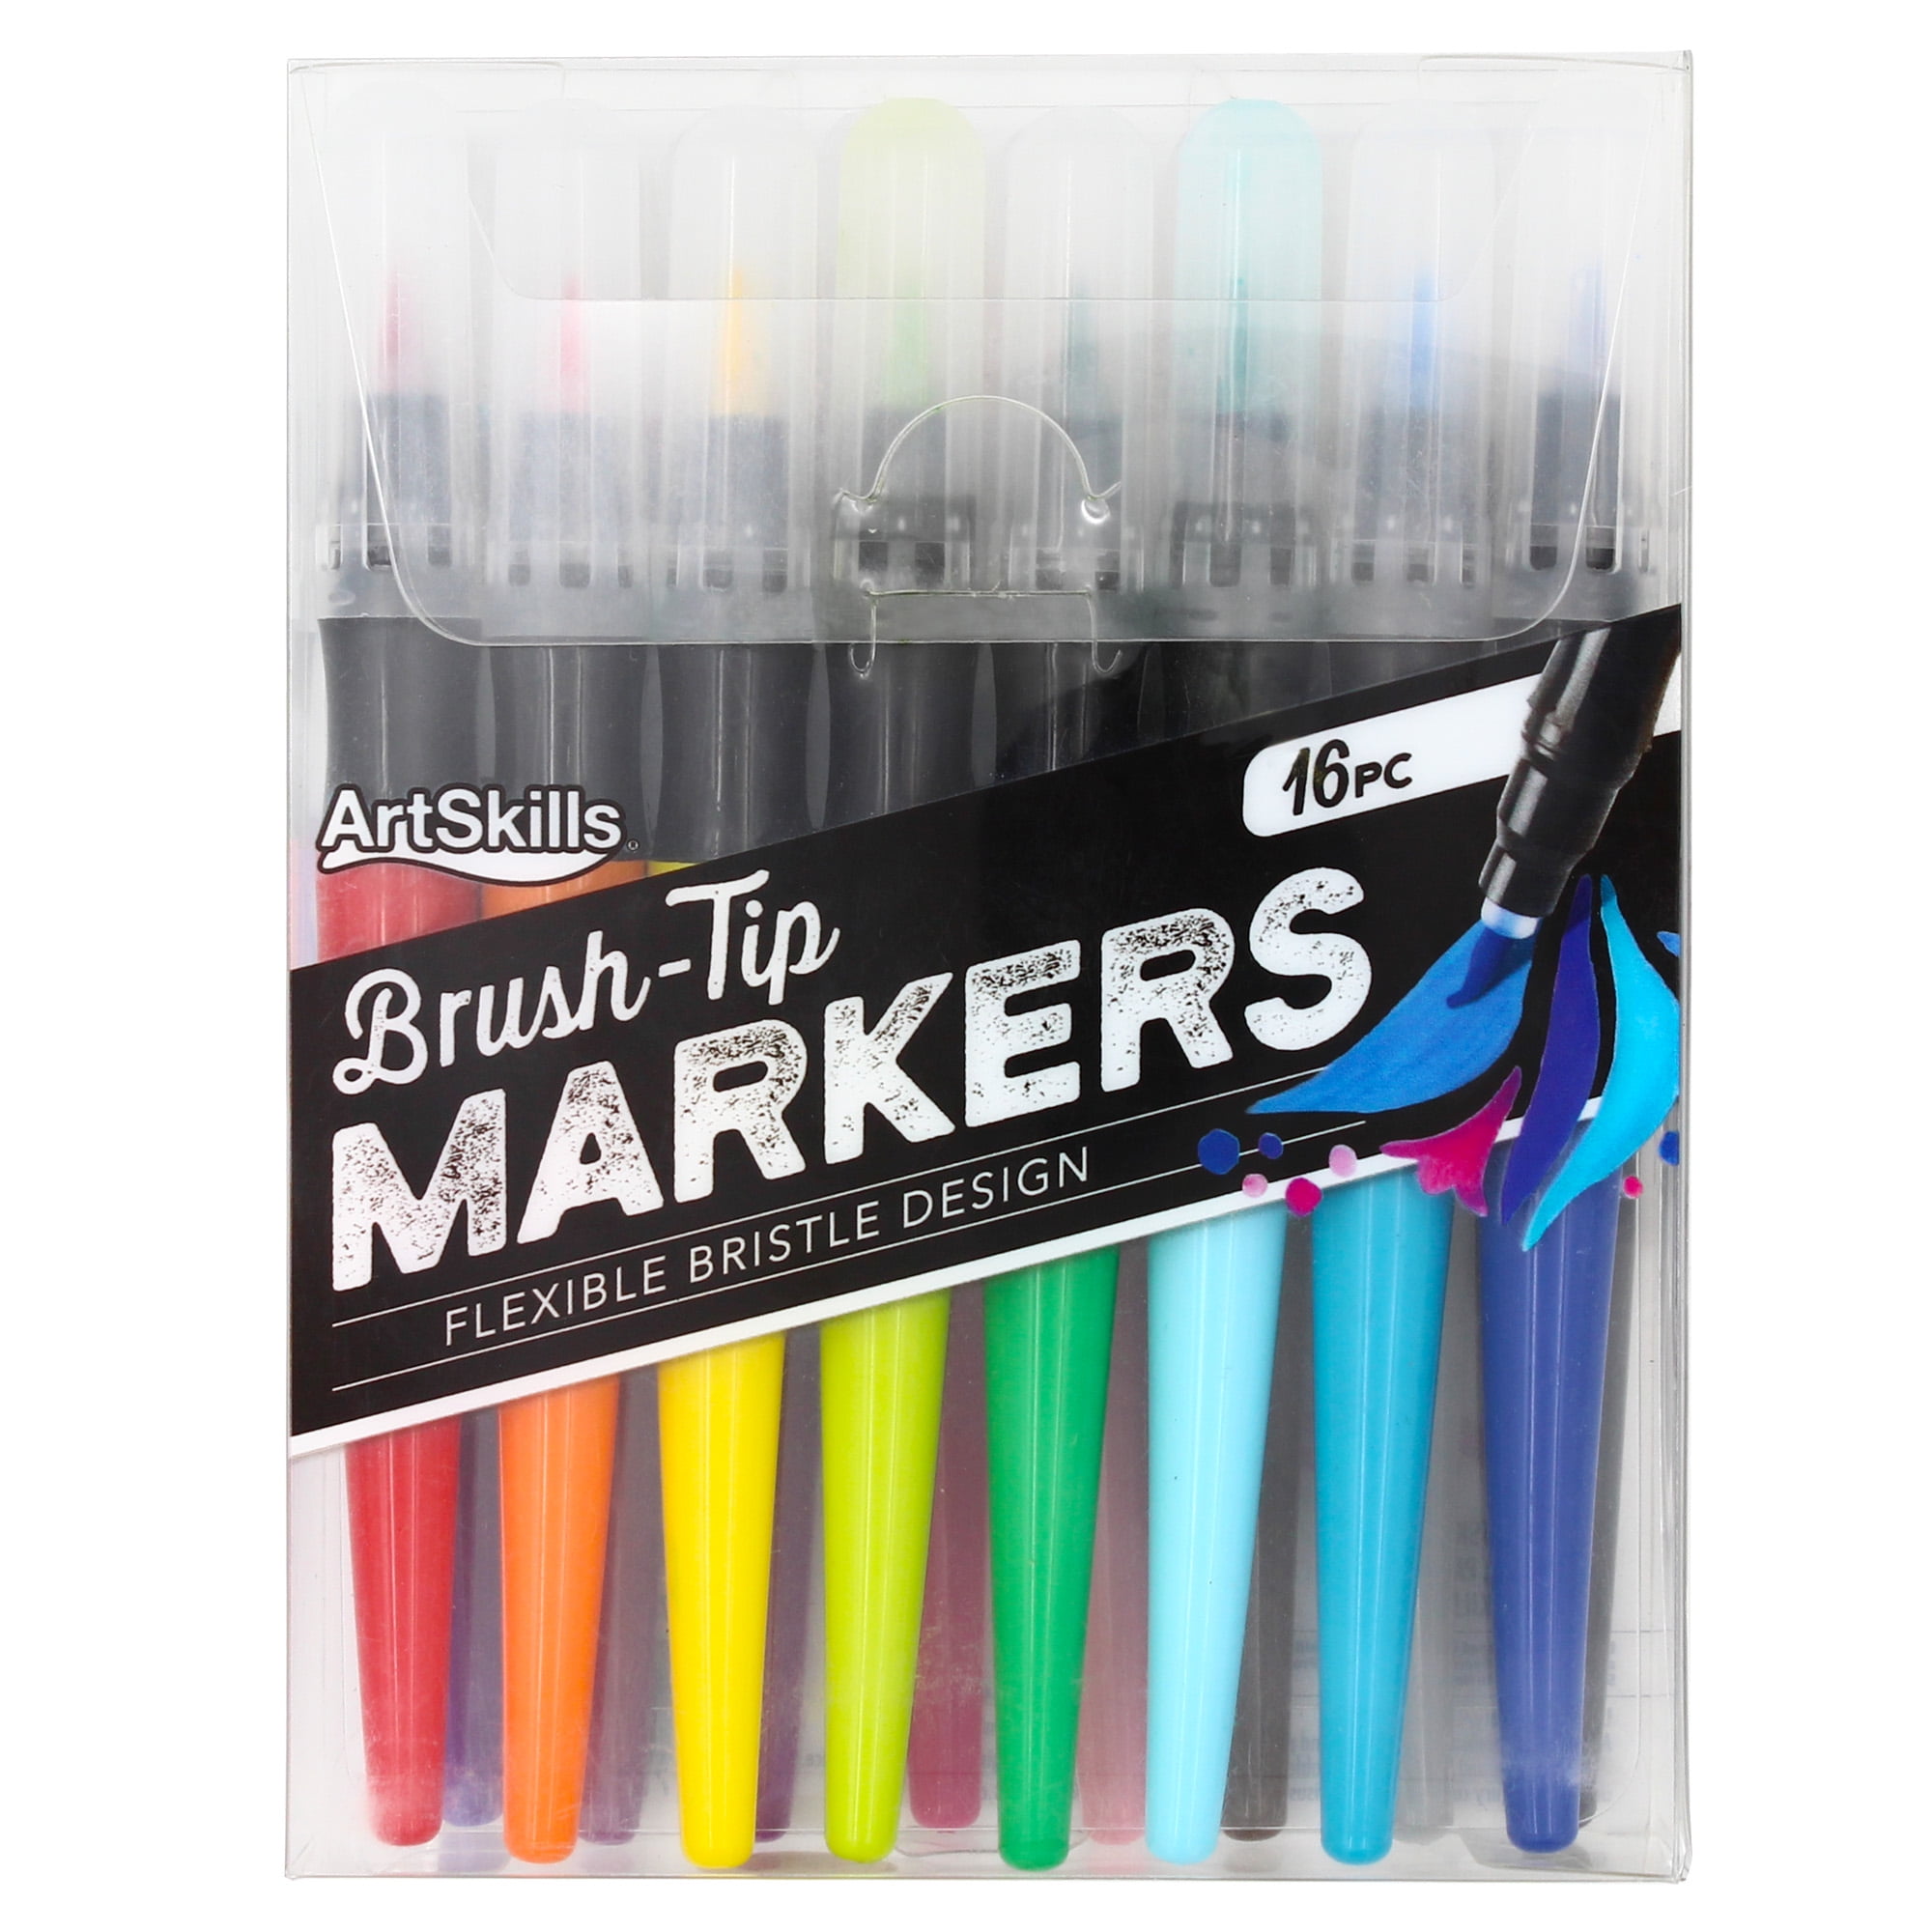 ArtSkills Blendable Markers 30-Count Alcohol Based 2 Blending Markers  Included